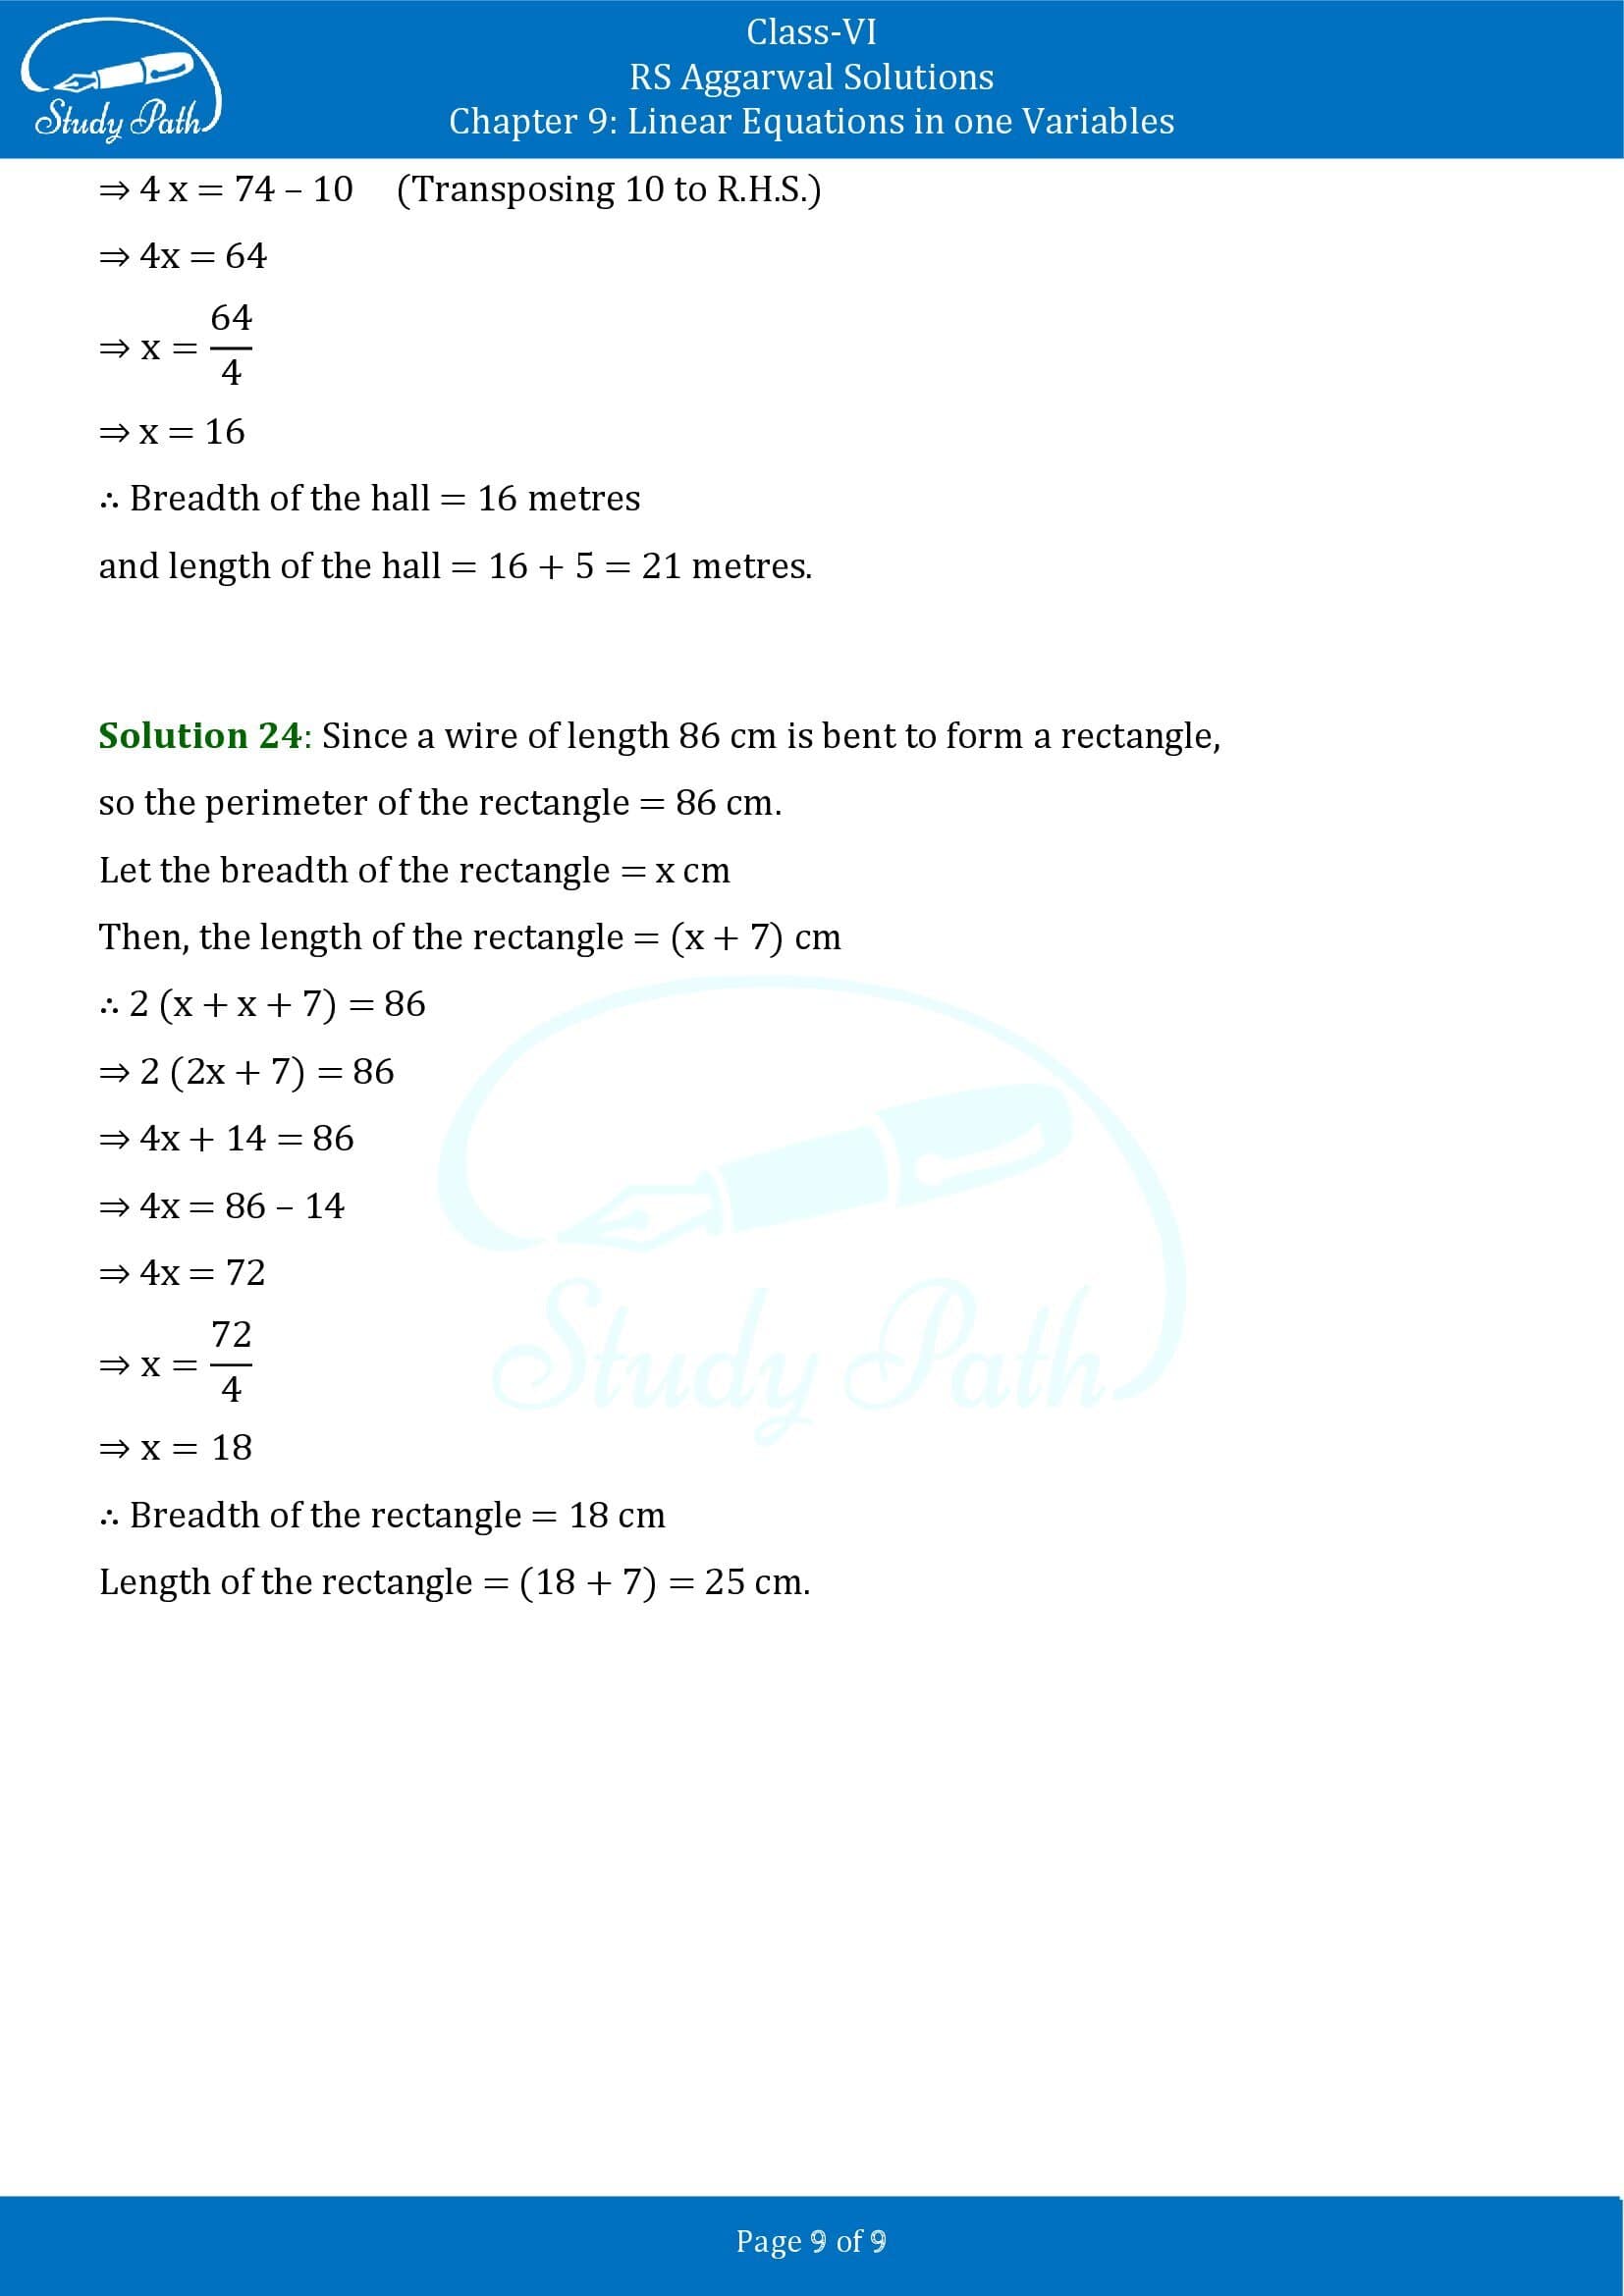 RS Aggarwal Solutions Class 6 Chapter 9 Linear Equations in One Variable Exercise 9C 00009